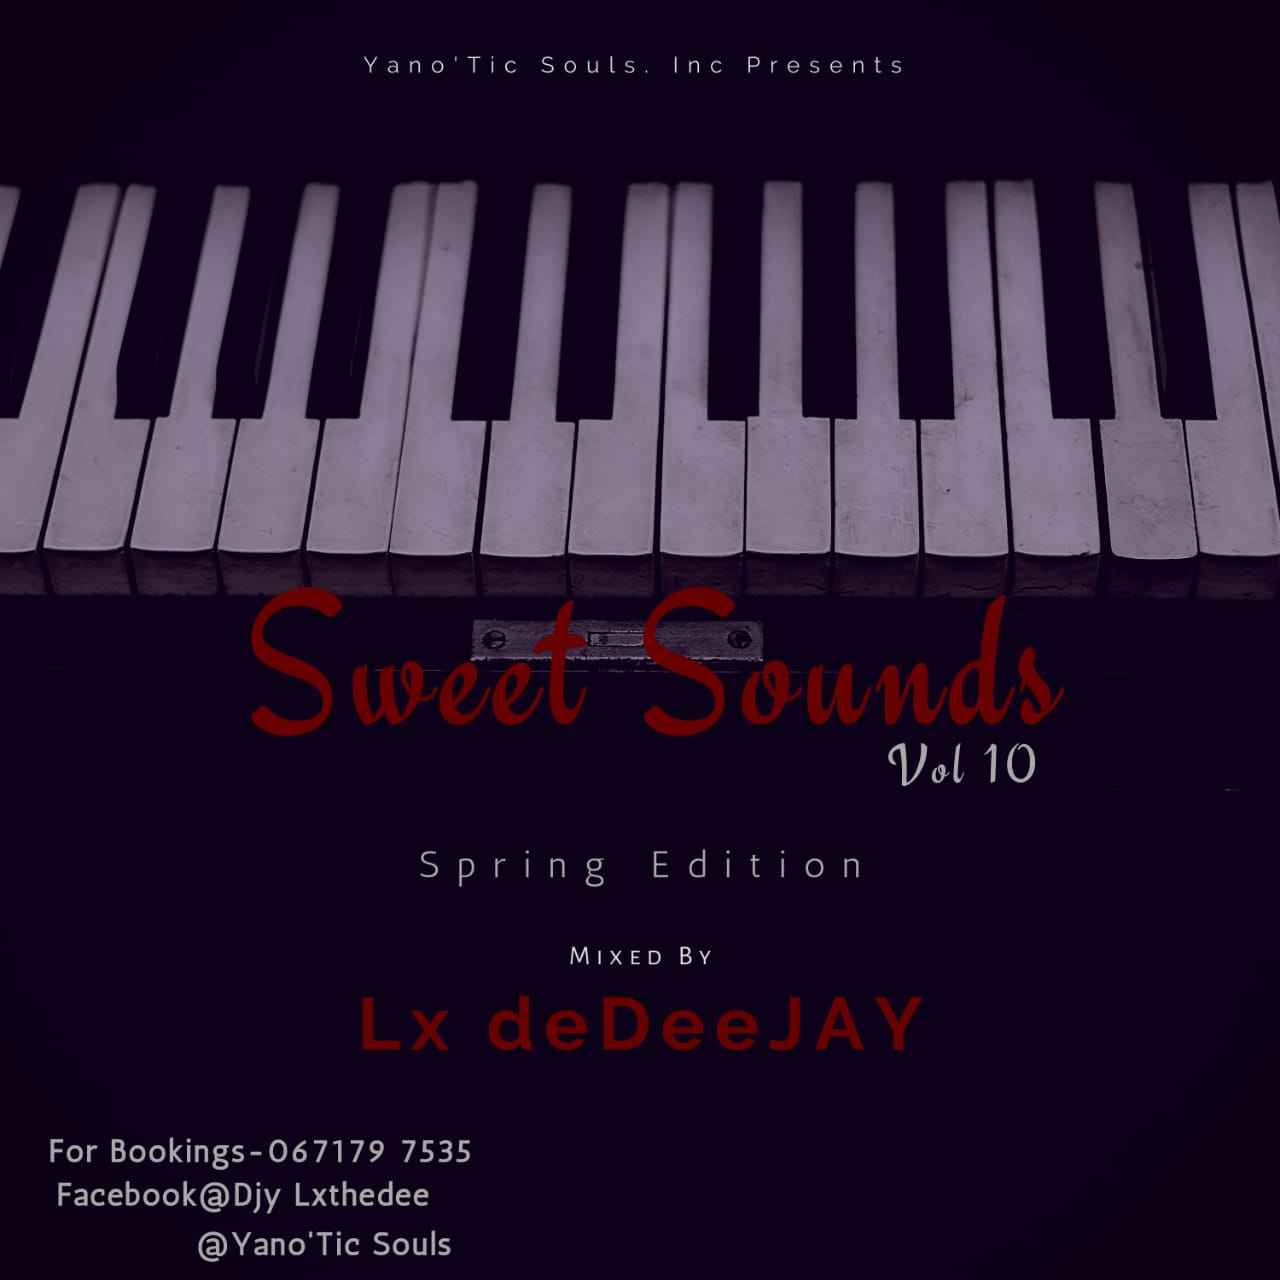 Lx deDeeJAY Sweet Sounds Vol 10 Mix (Spring Edition)